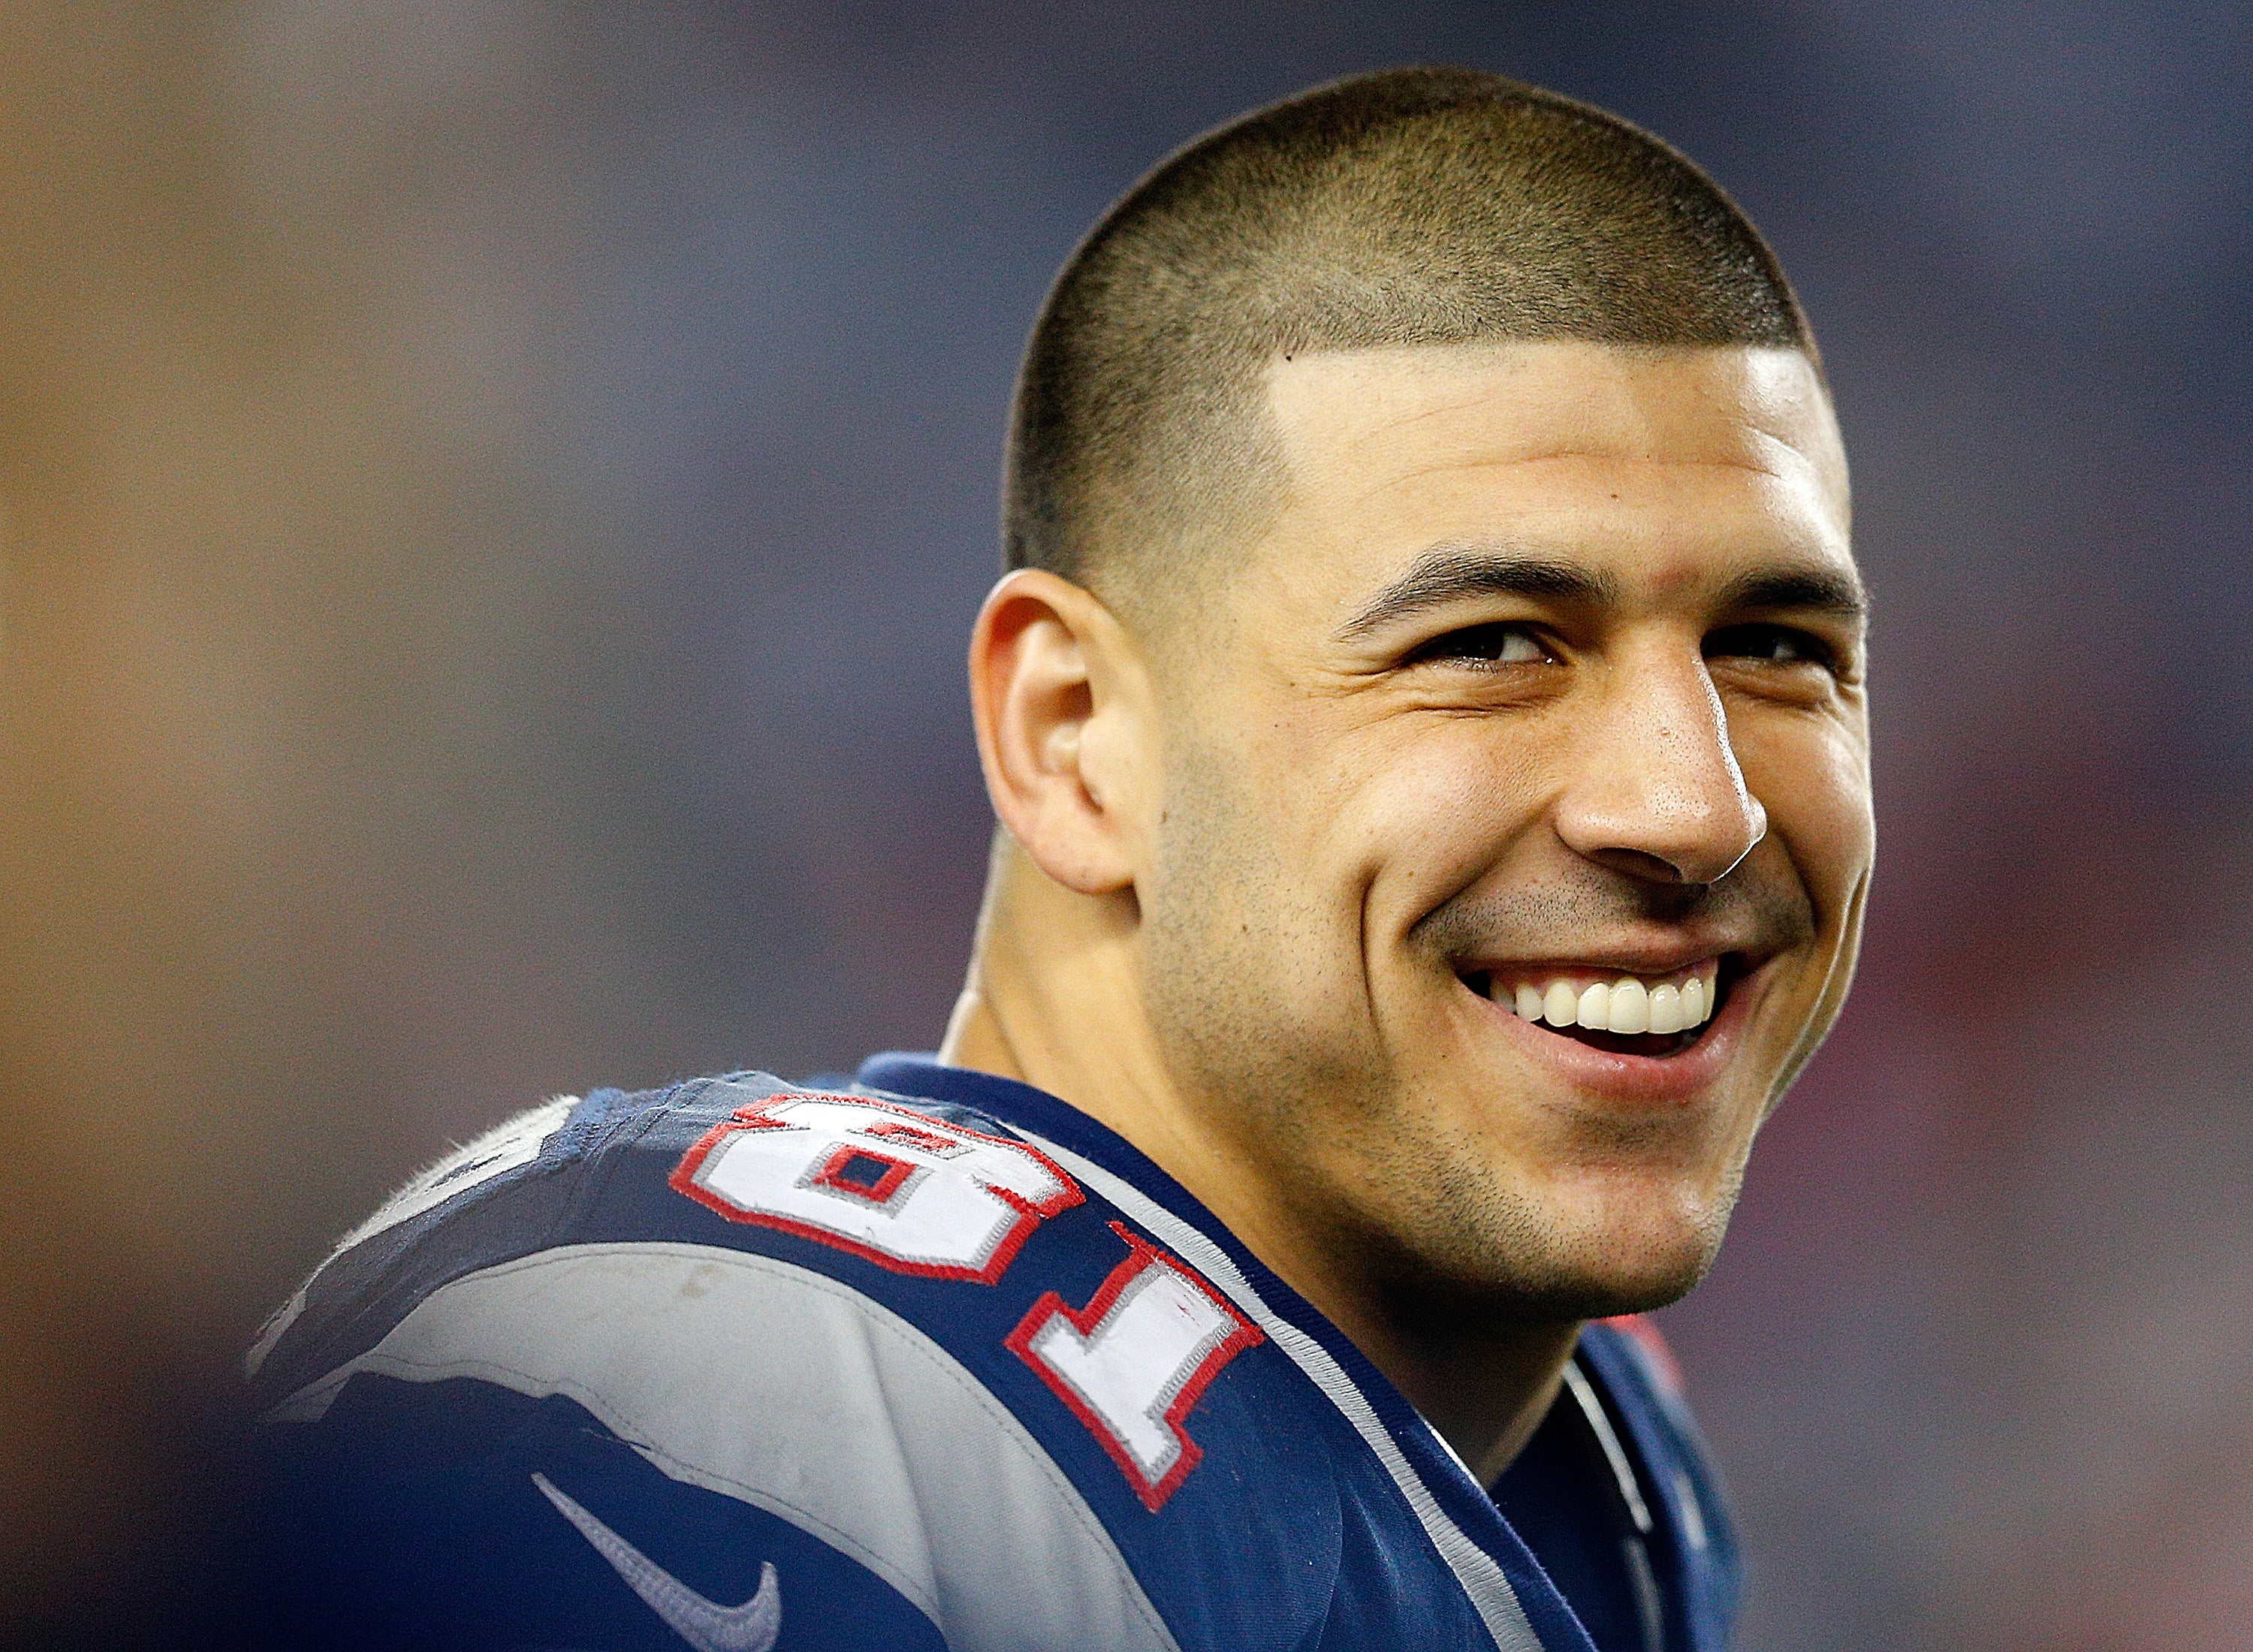 Aaron Hernandez during his time with the New England Patriots